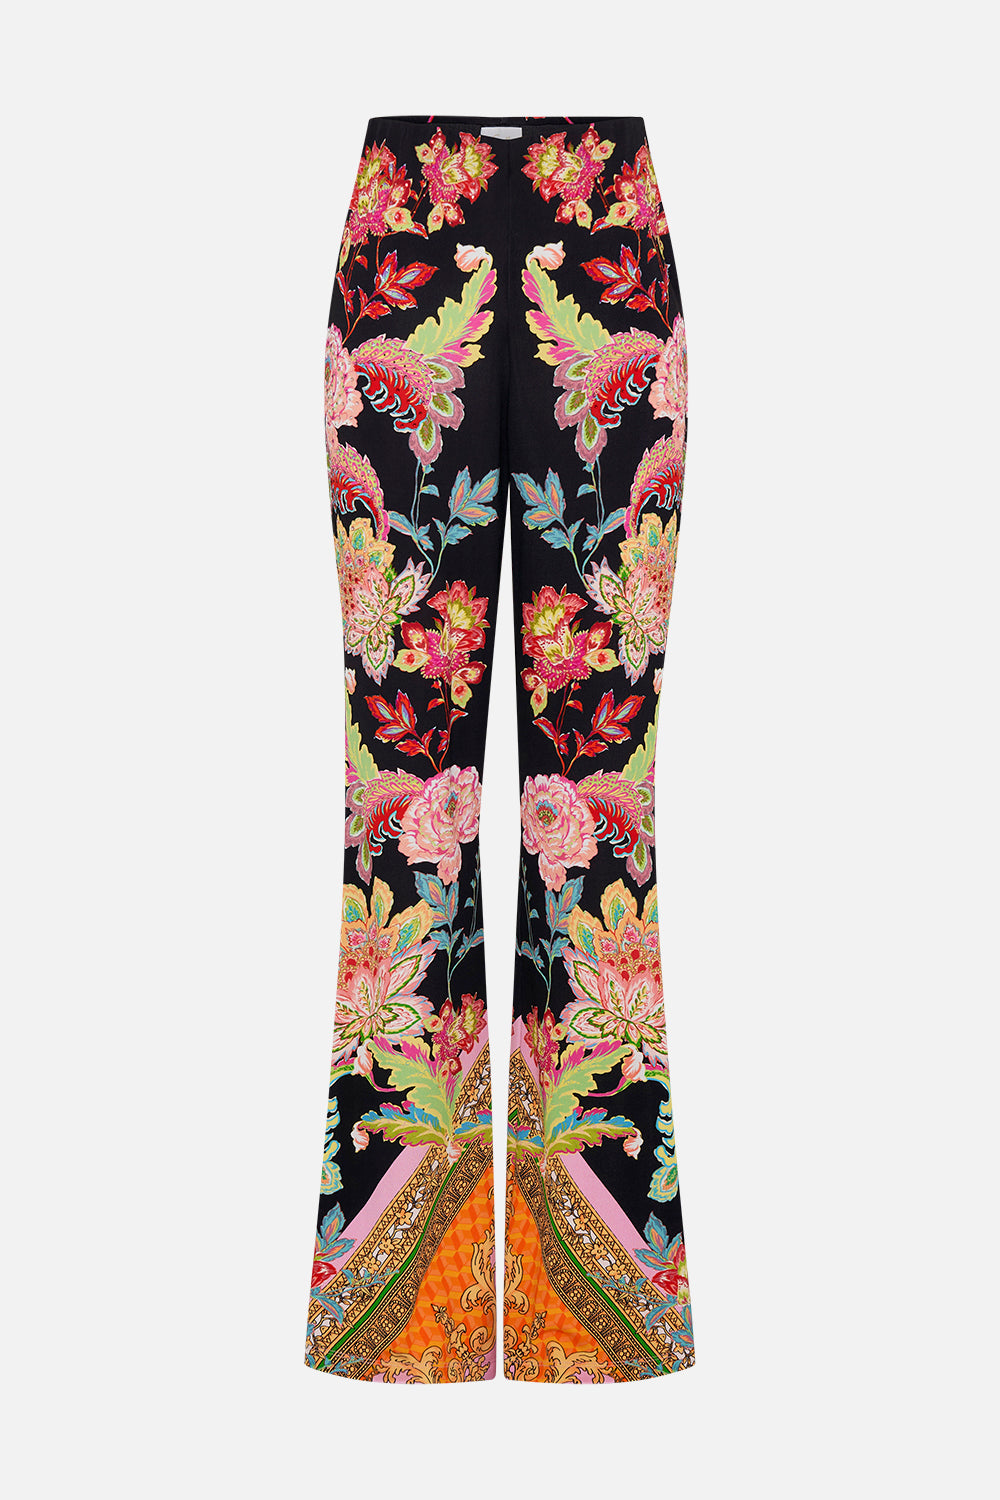 Product view of CAMILLA printed jersey flared pants in Sundowners In Sicily print